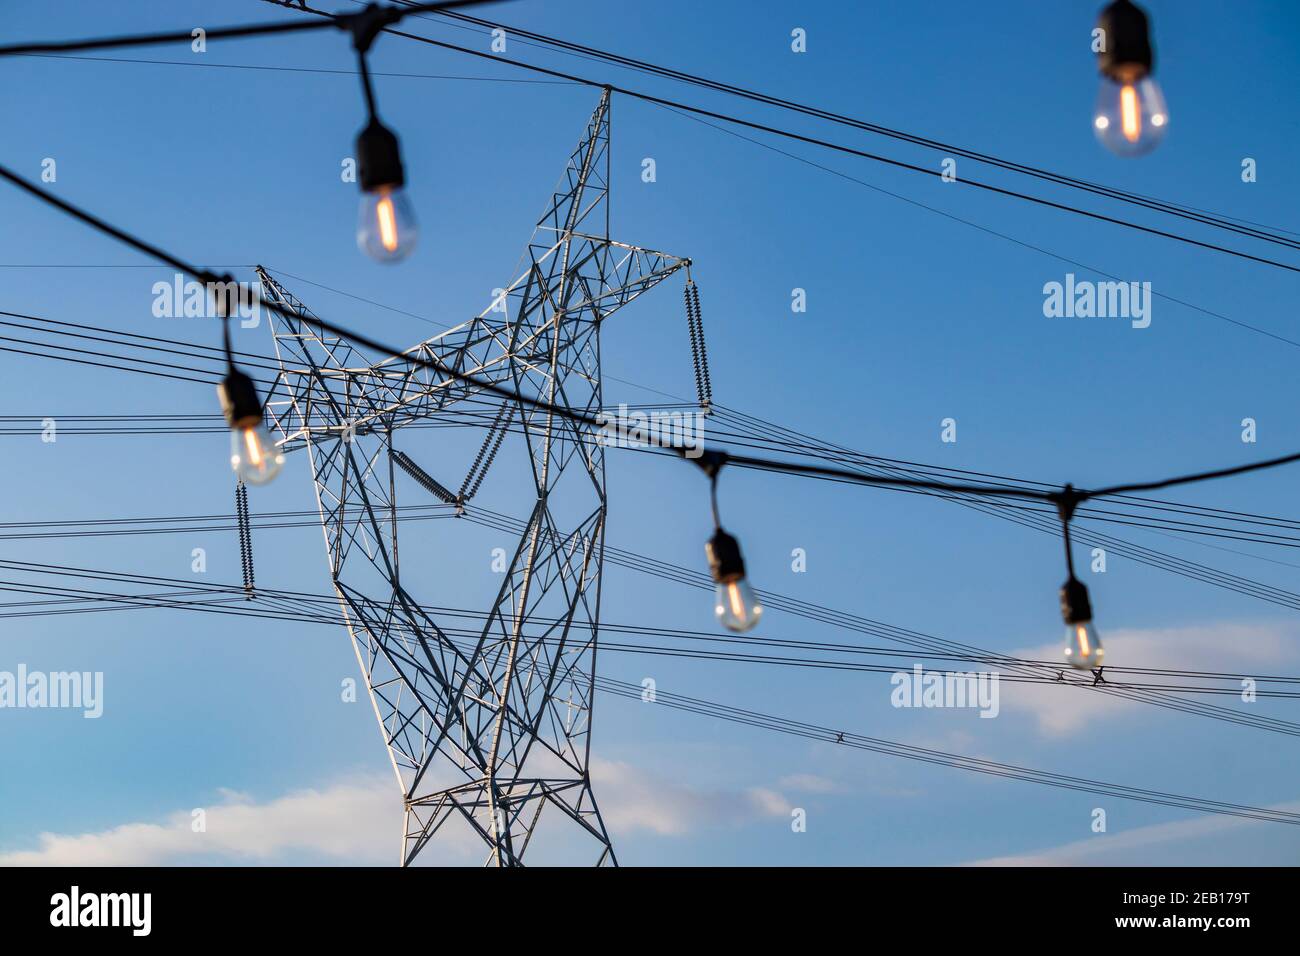 Edison style string lights and electric pylon in the background on a sunny day Stock Photo